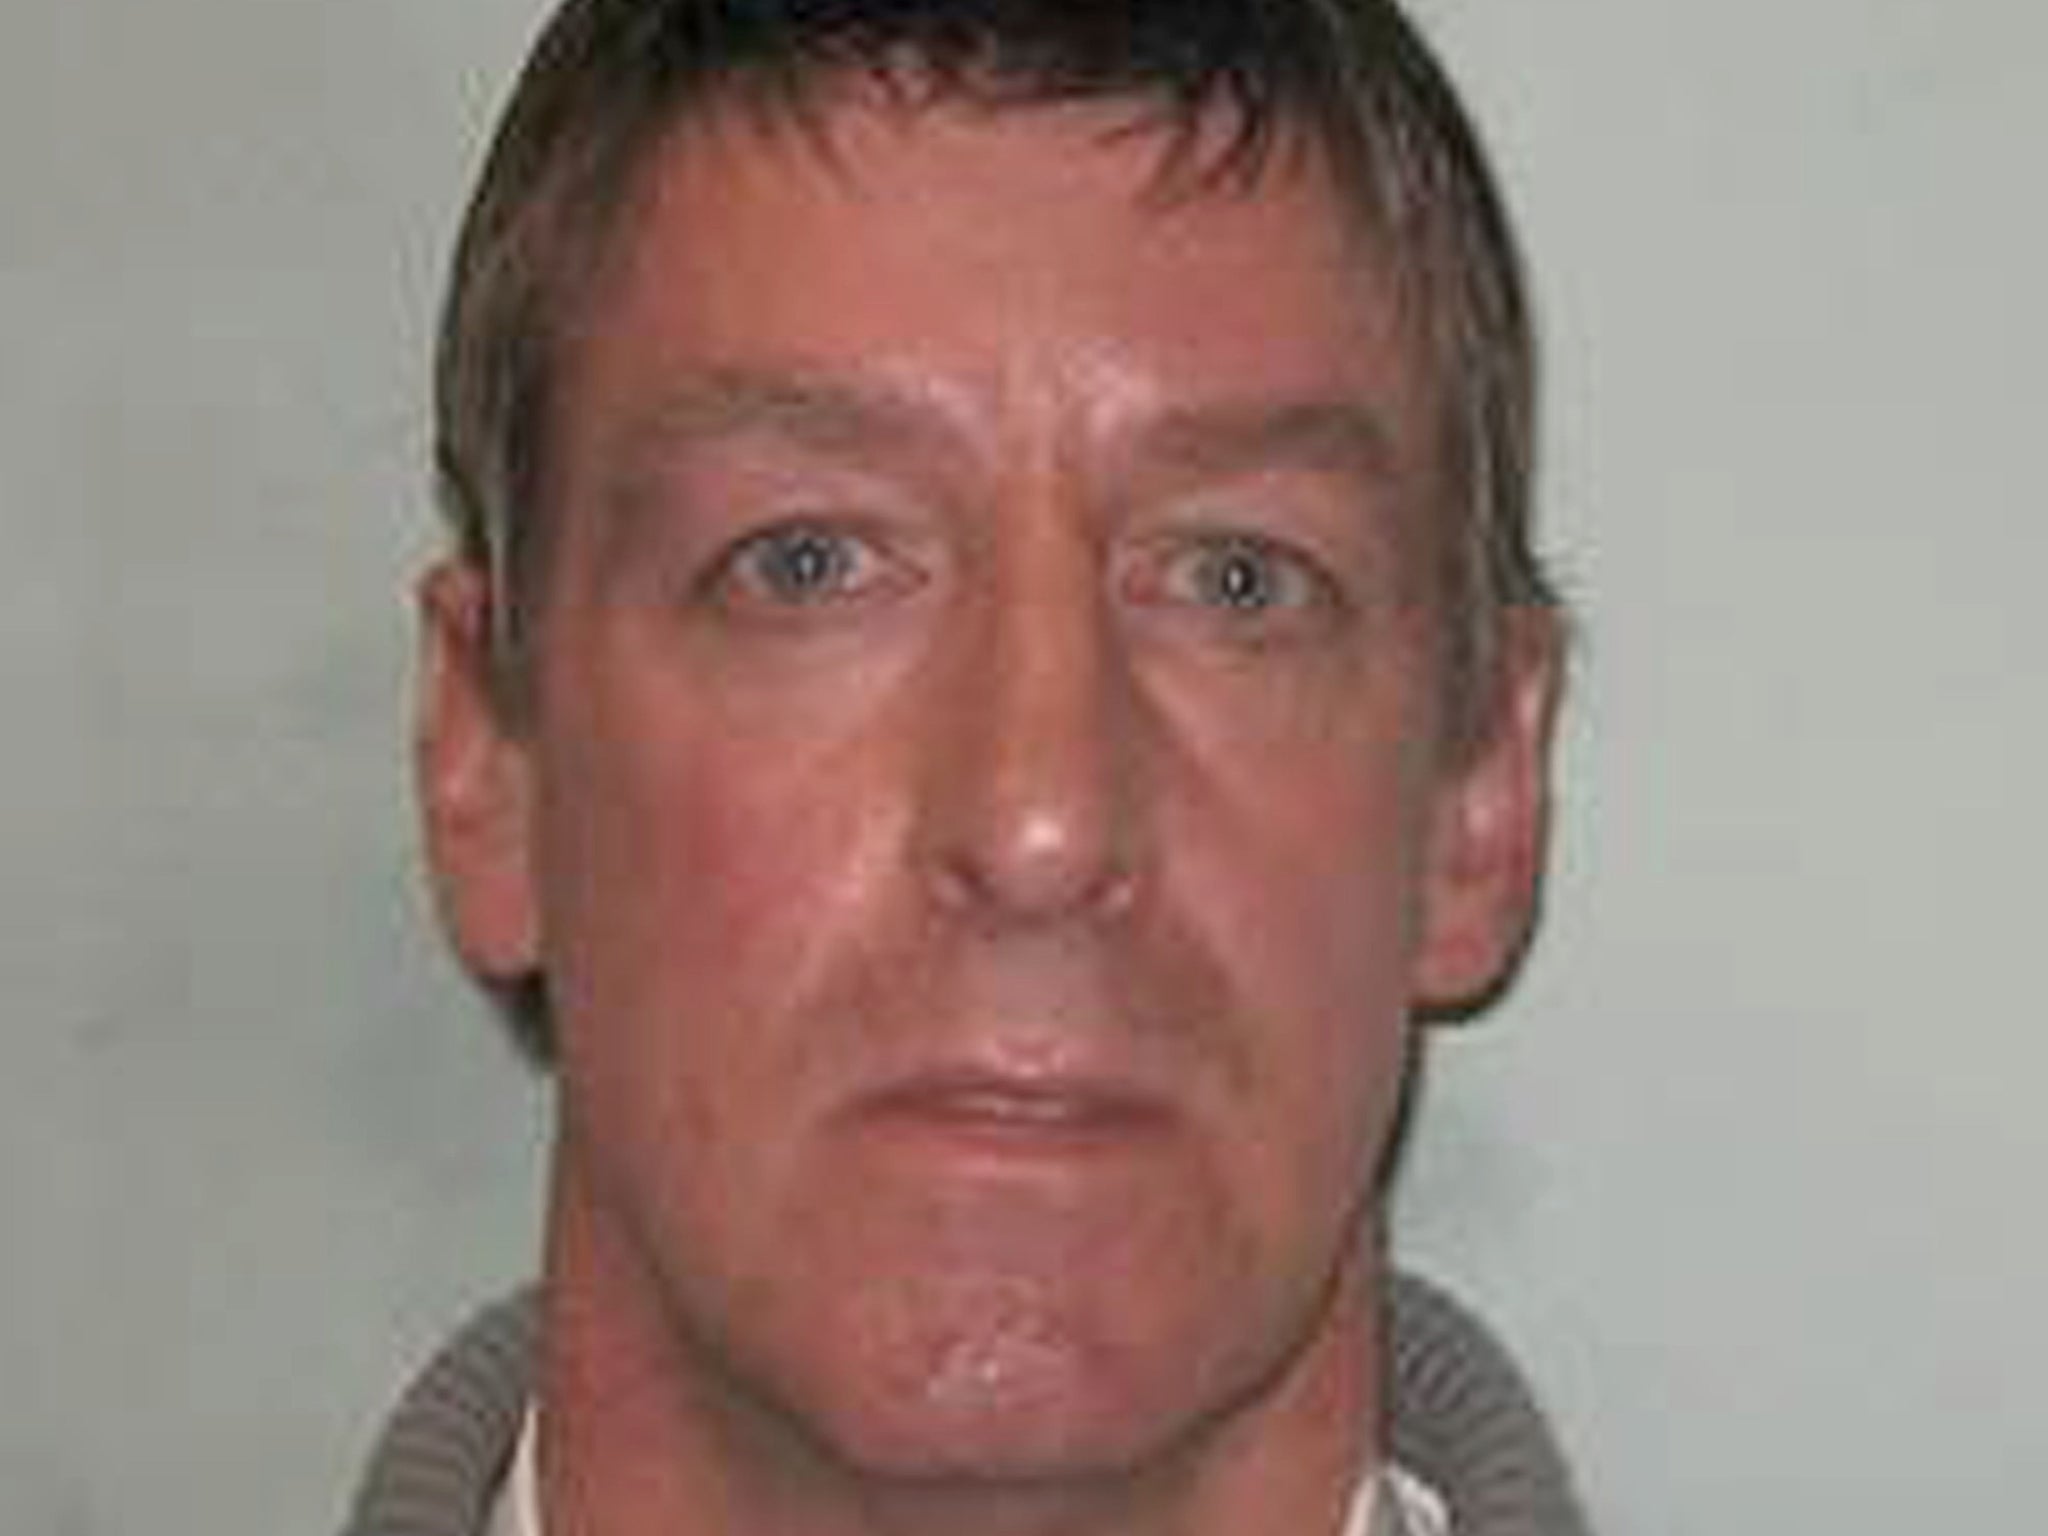 Tony Aslett has been jailed for nine months after downloading more than 15,000 child abuse images